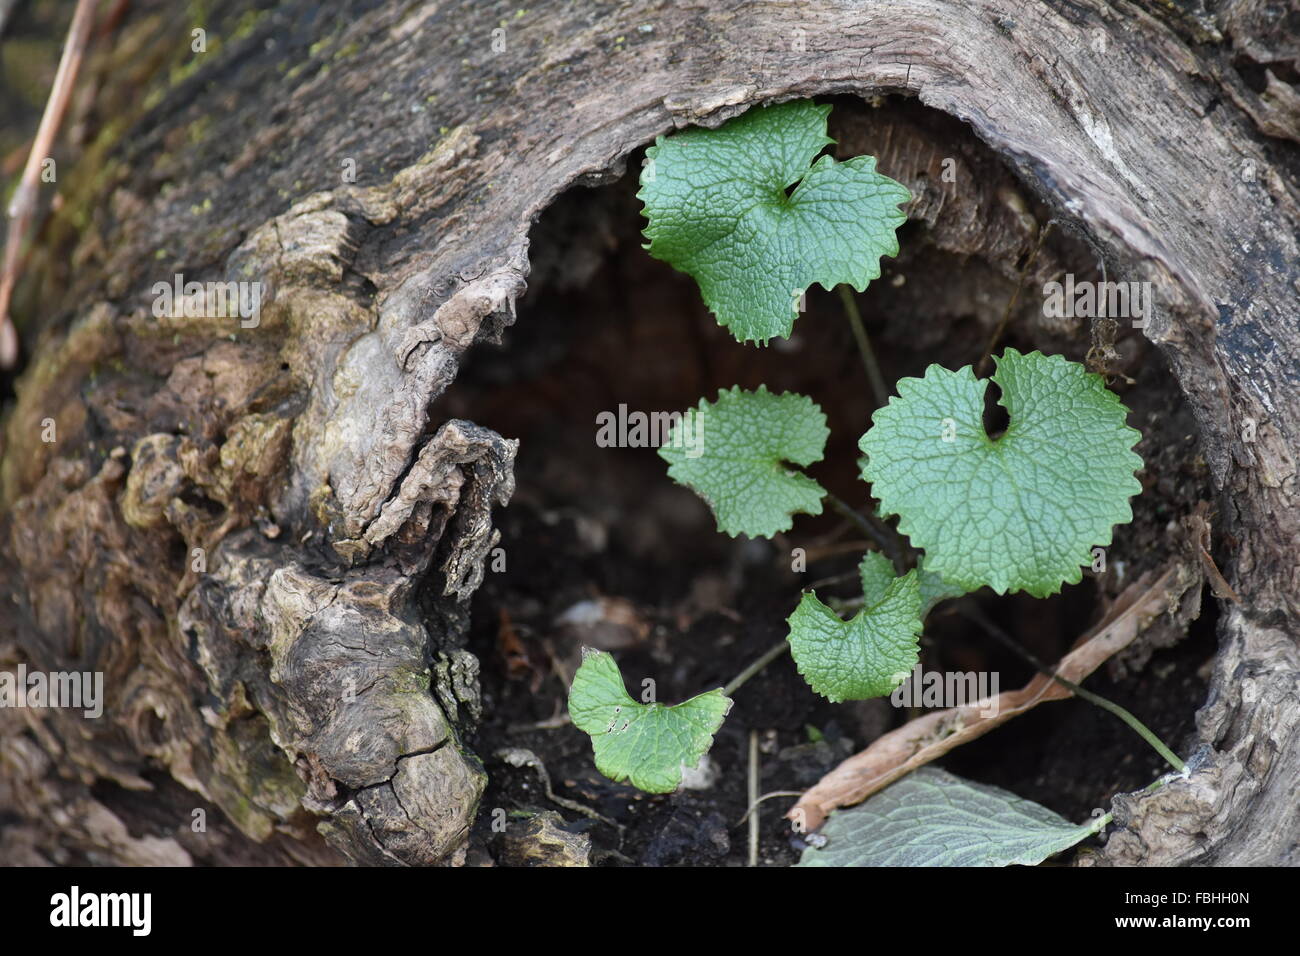 mint like leaves growing out of a knot on a fallen  tree. Stock Photo